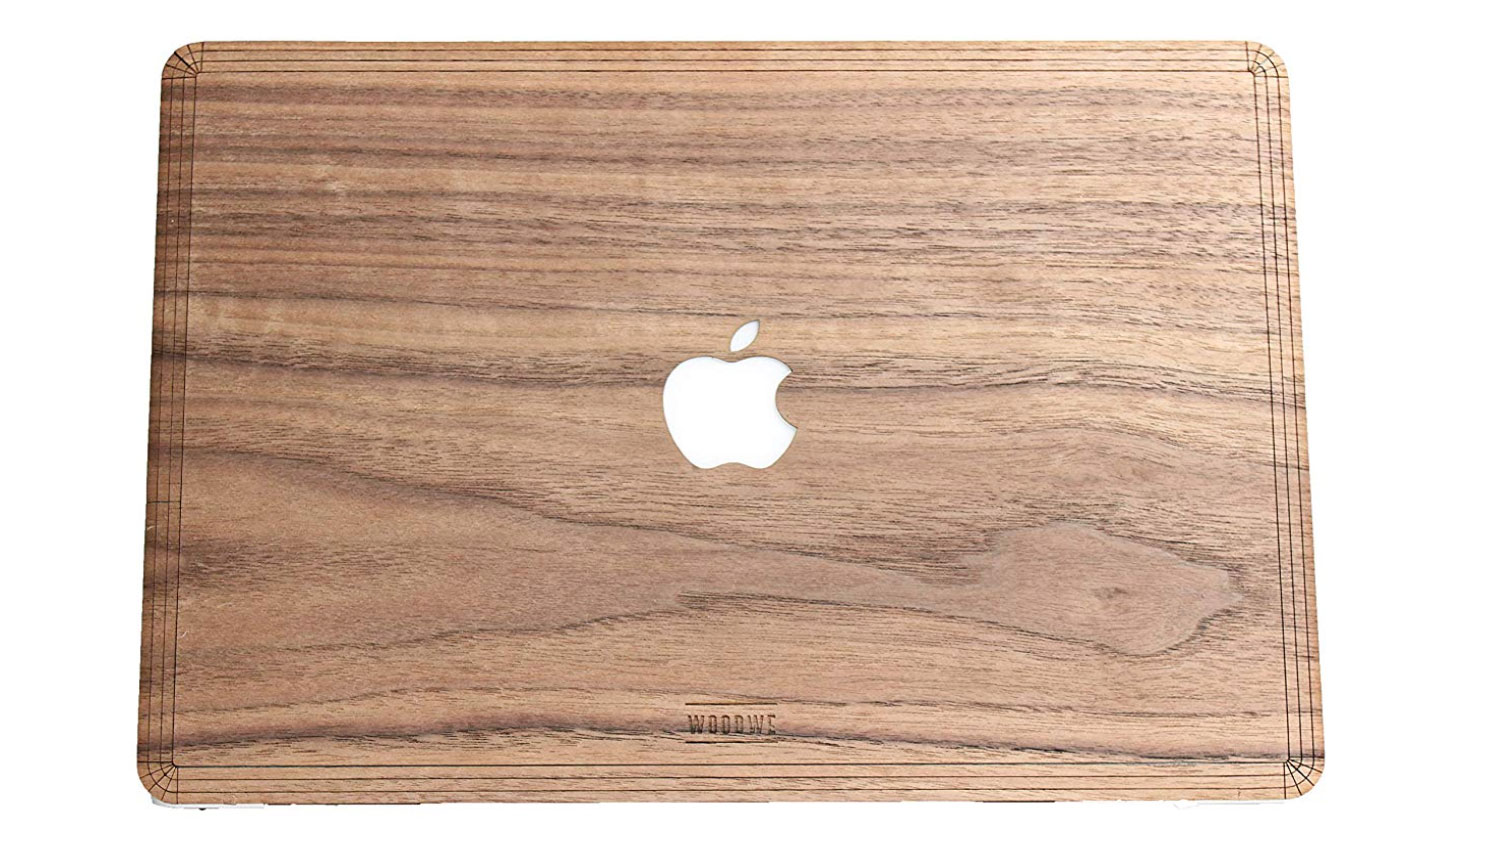 WOODWE Real Wood laptop cover